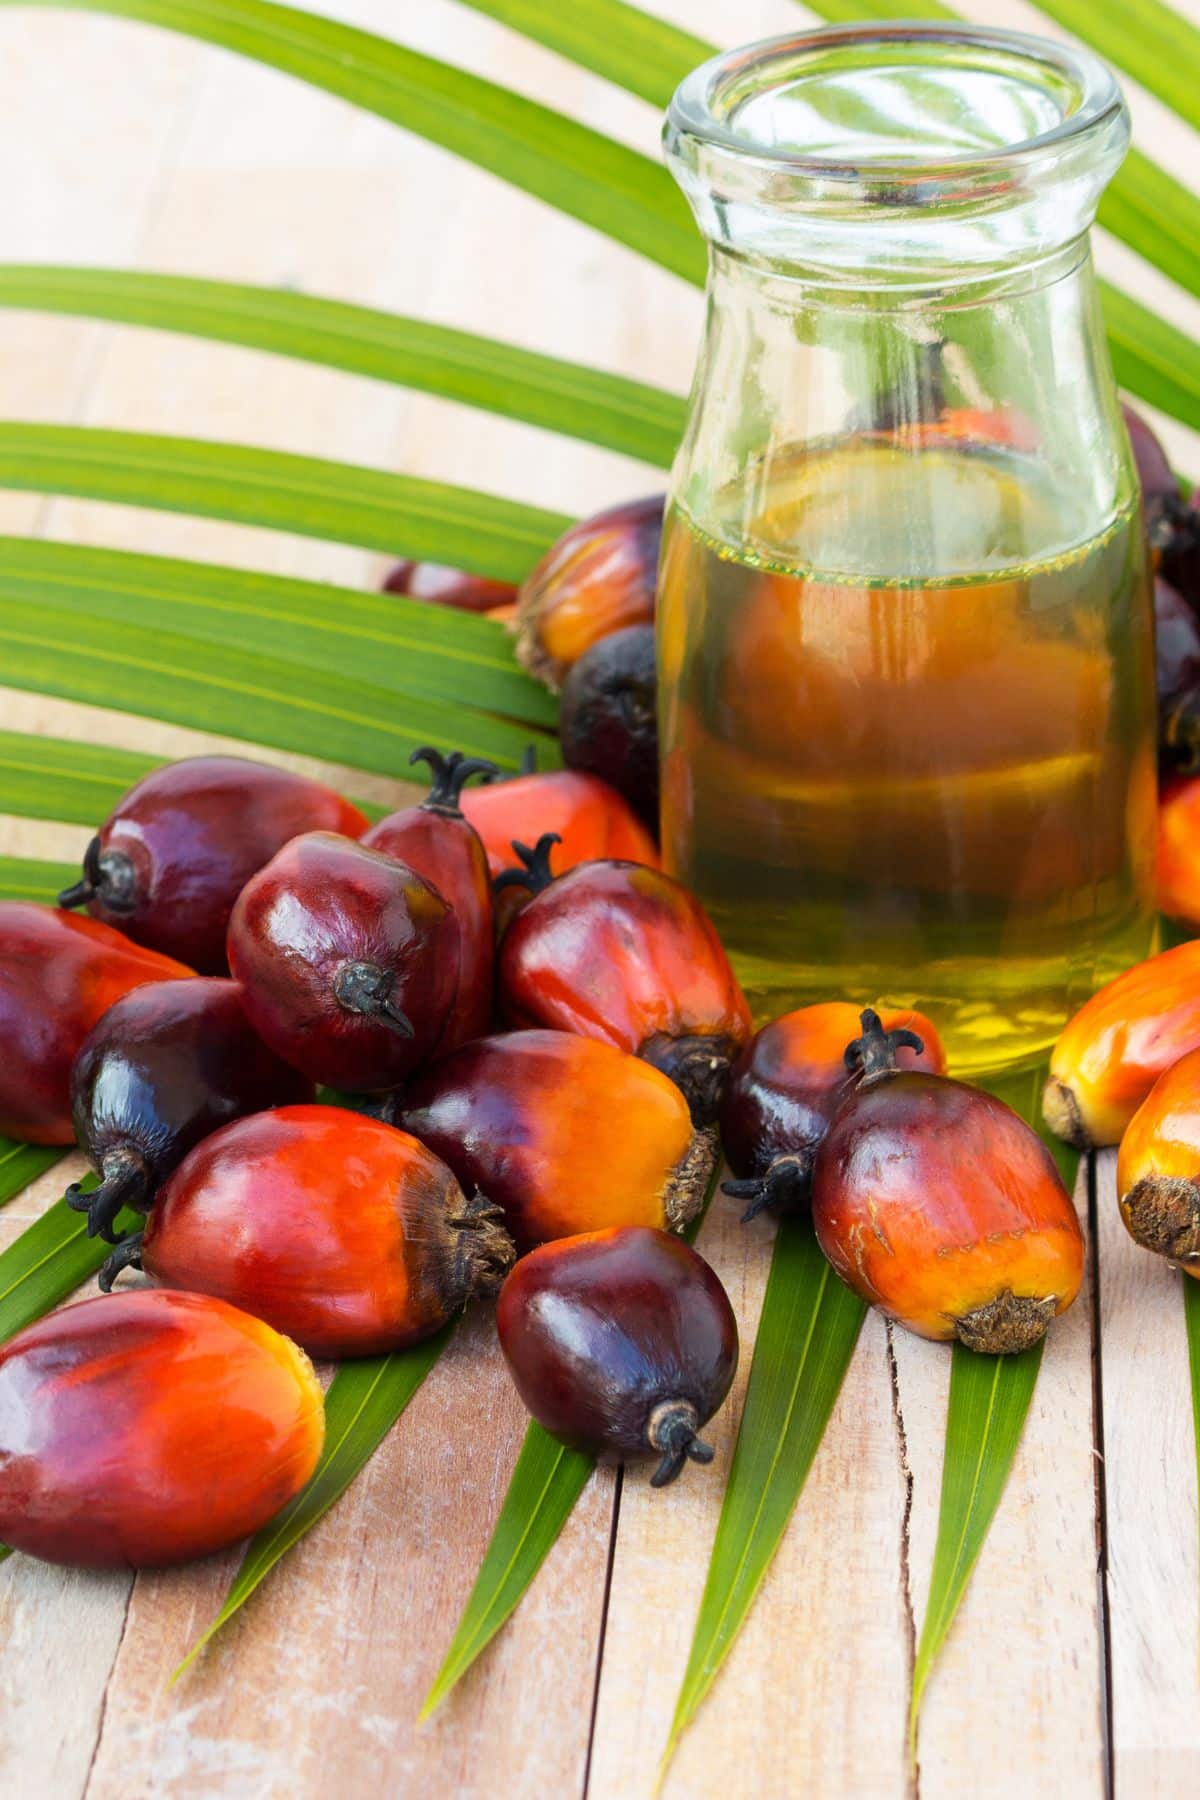 a jar of palm oil behind palm fruit on a wooden table.